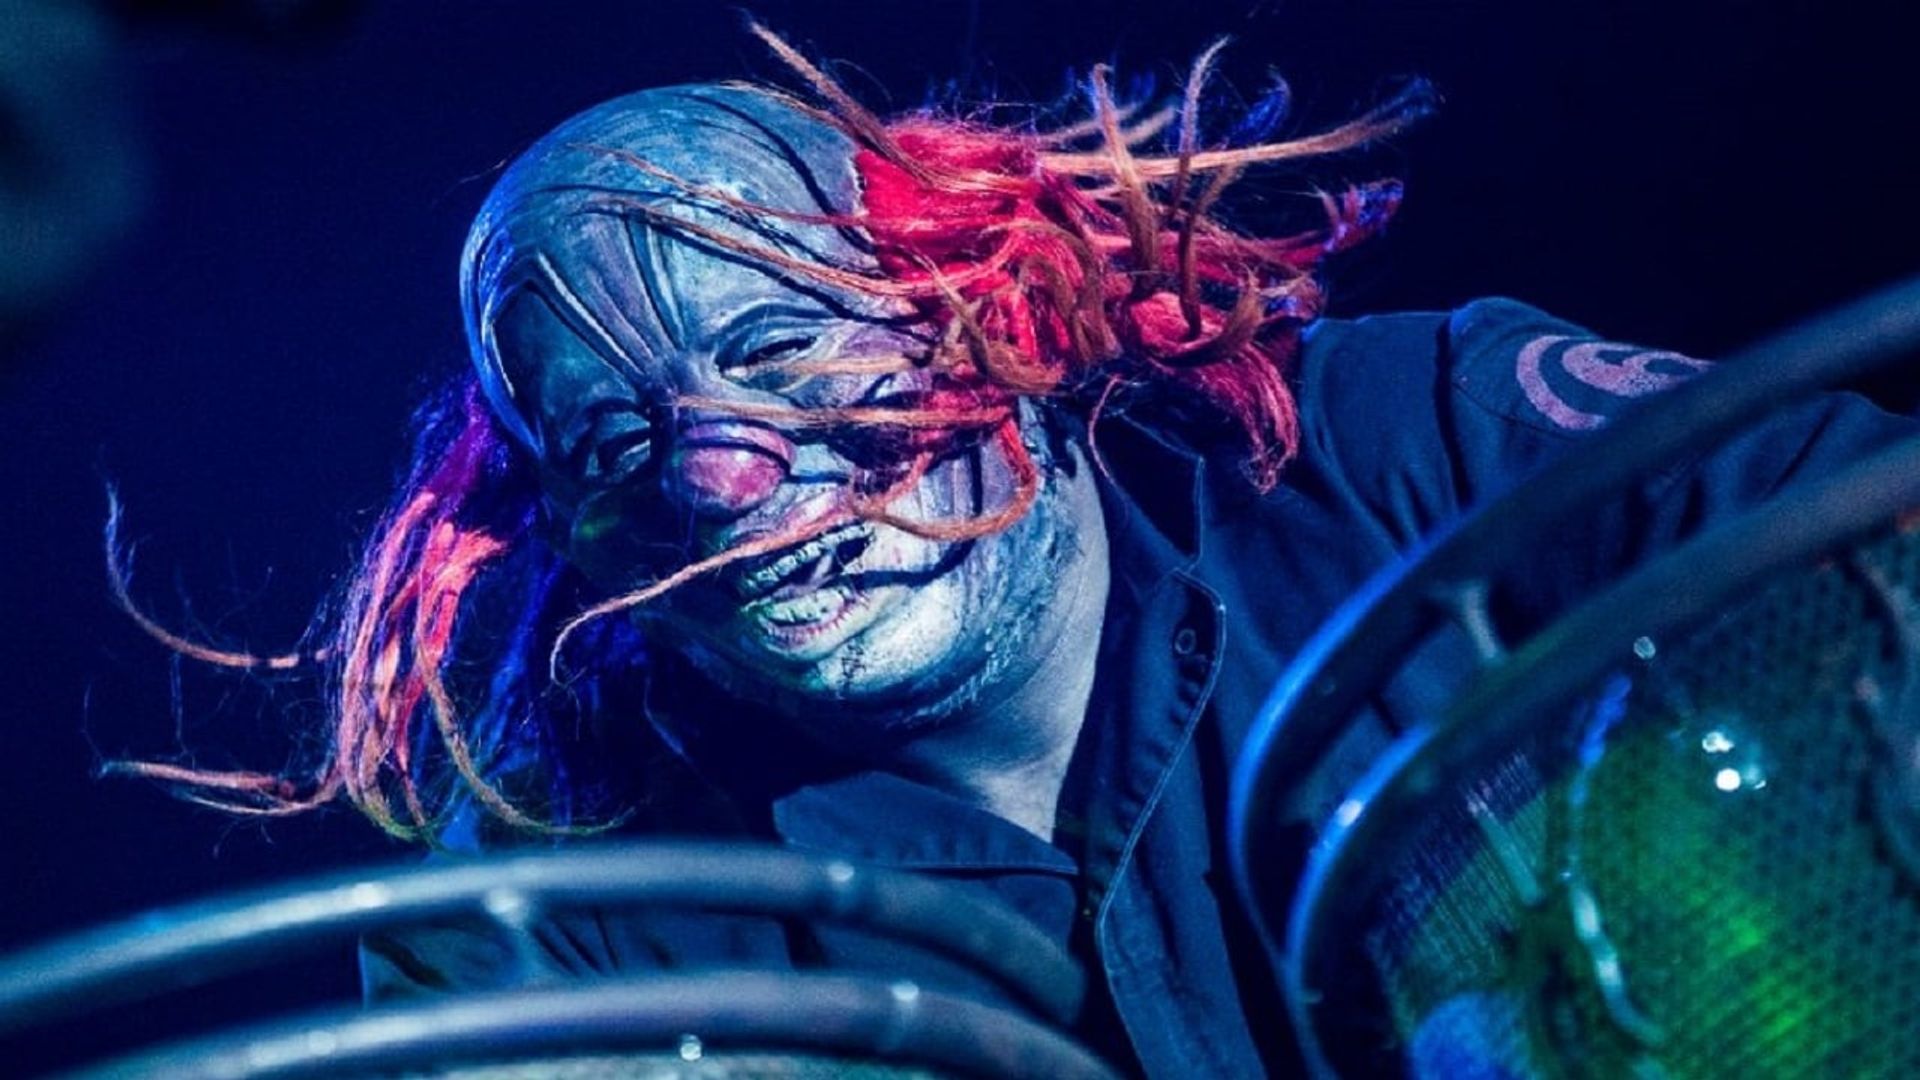 Slipknot: Day of the Gusano background